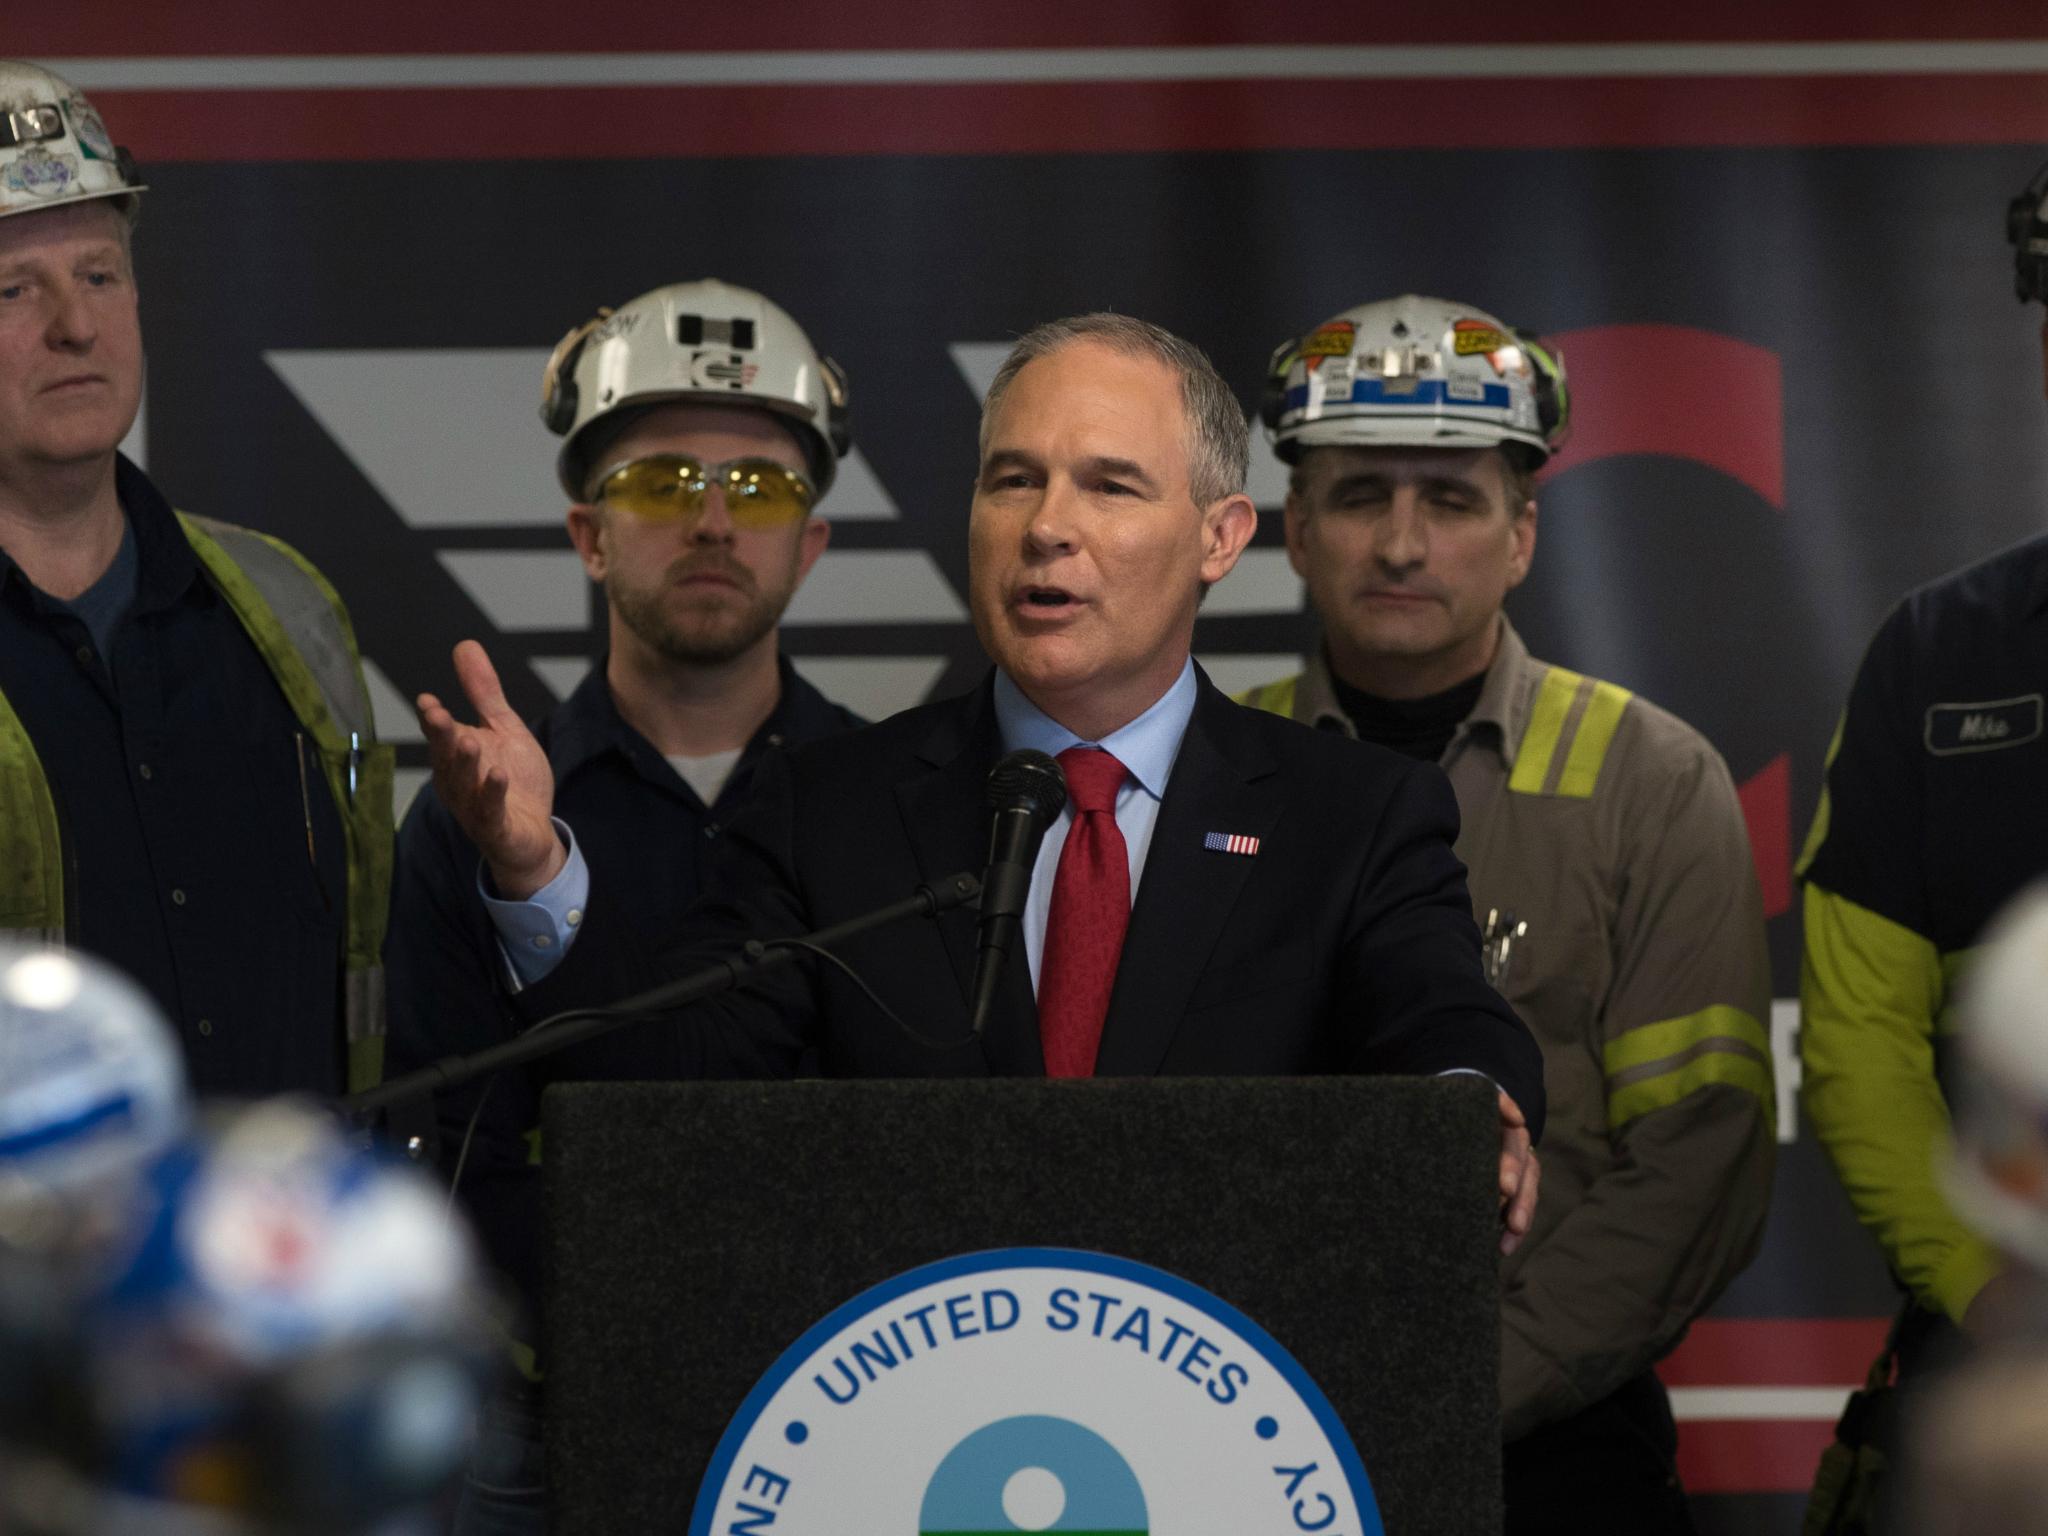 US Environmental Protection Agency Administrator Scott Pruitt speaks with coal miners at the Harvey Mine on 13 April 2017 Sycamore, Pennsylvania.